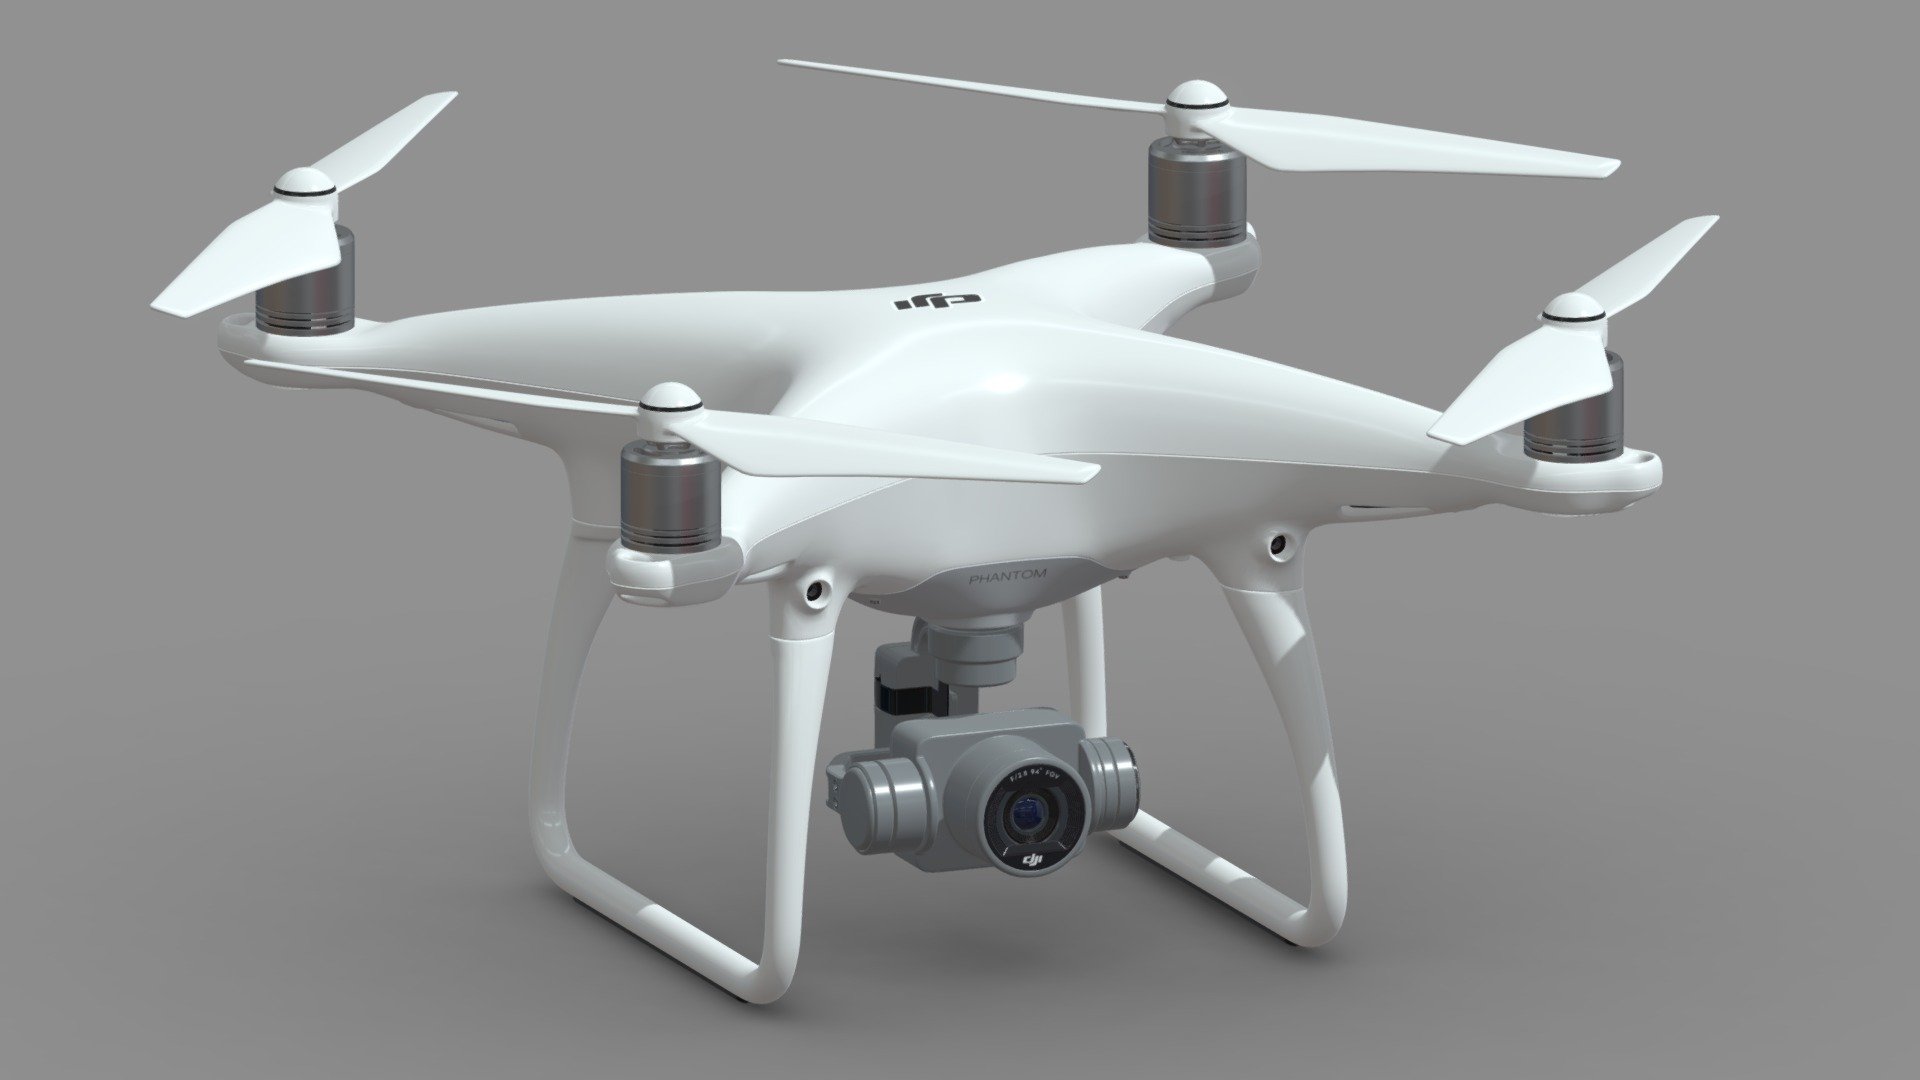 Hi, I'm Frezzy. I am leader of Cgivn studio. We are finished over 3000 projects since 2013.
If you want hire me to do 3d model please touch me at:cgivn.studio Thanks you! - DJI Phantom 4 - Buy Royalty Free 3D model by Frezzy3D 3d model